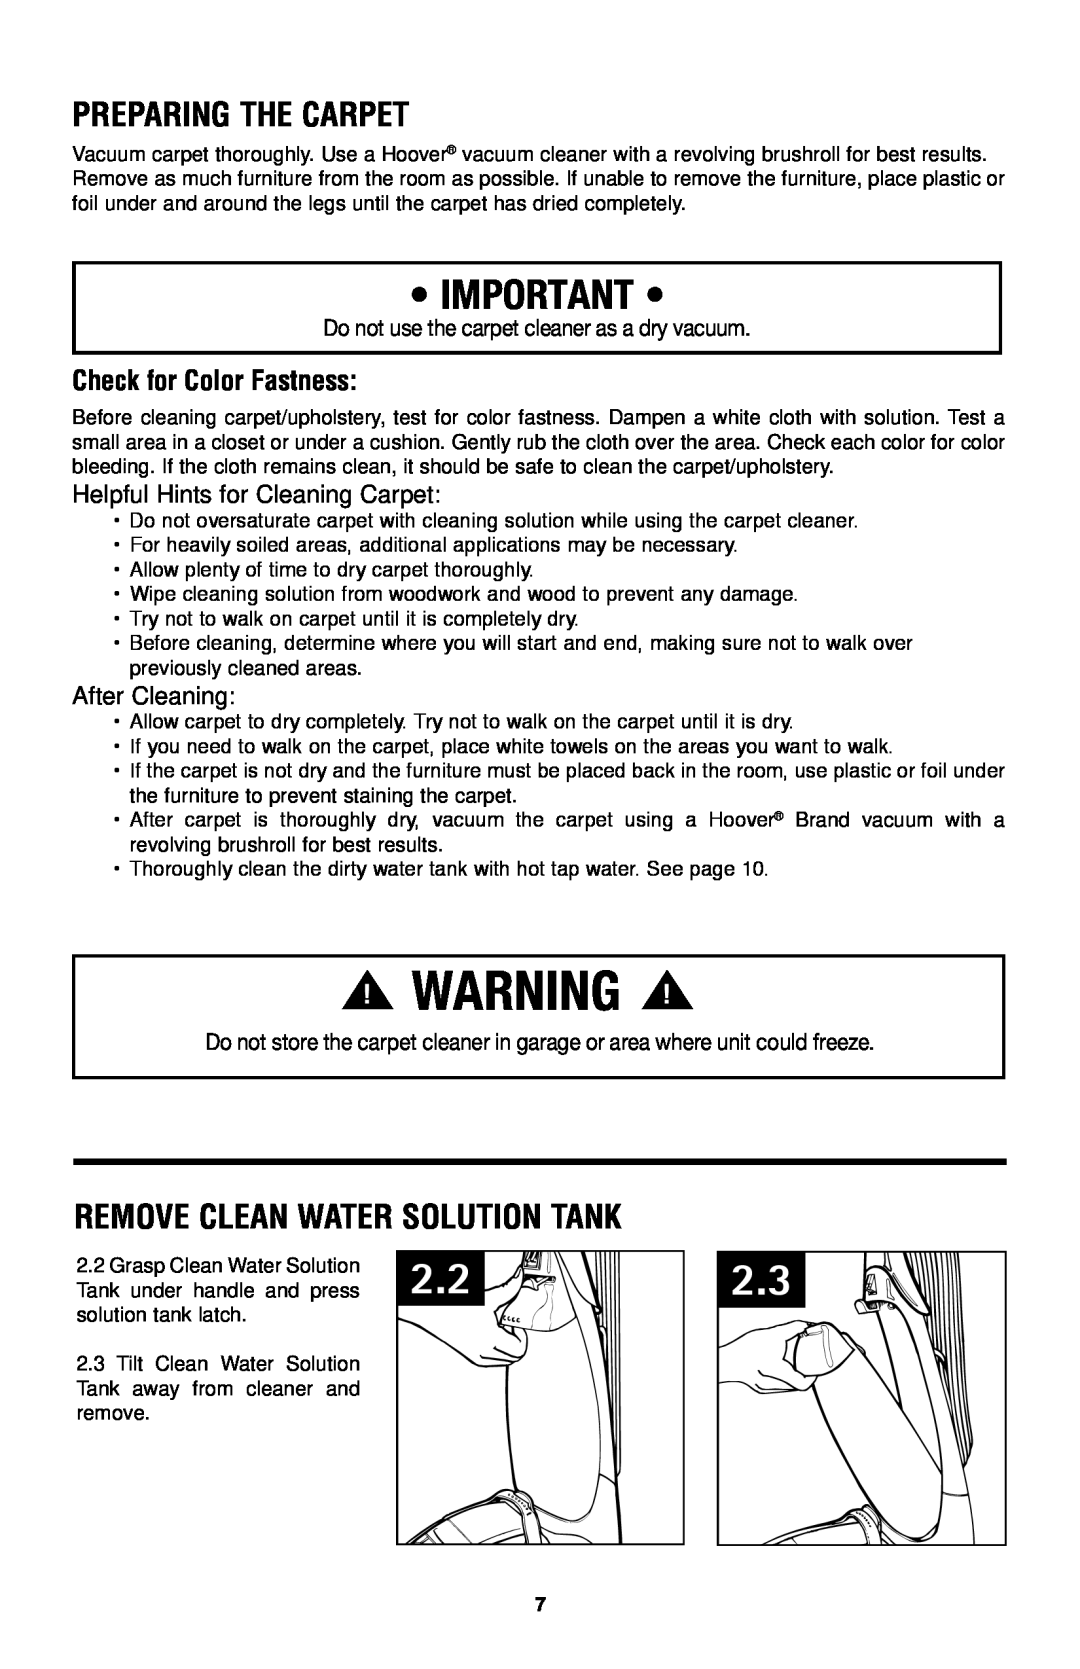 Hoover E1 owner manual Preparing the Carpet, Remove Clean Water Solution Tank, Check for Color Fastness, After Cleaning 